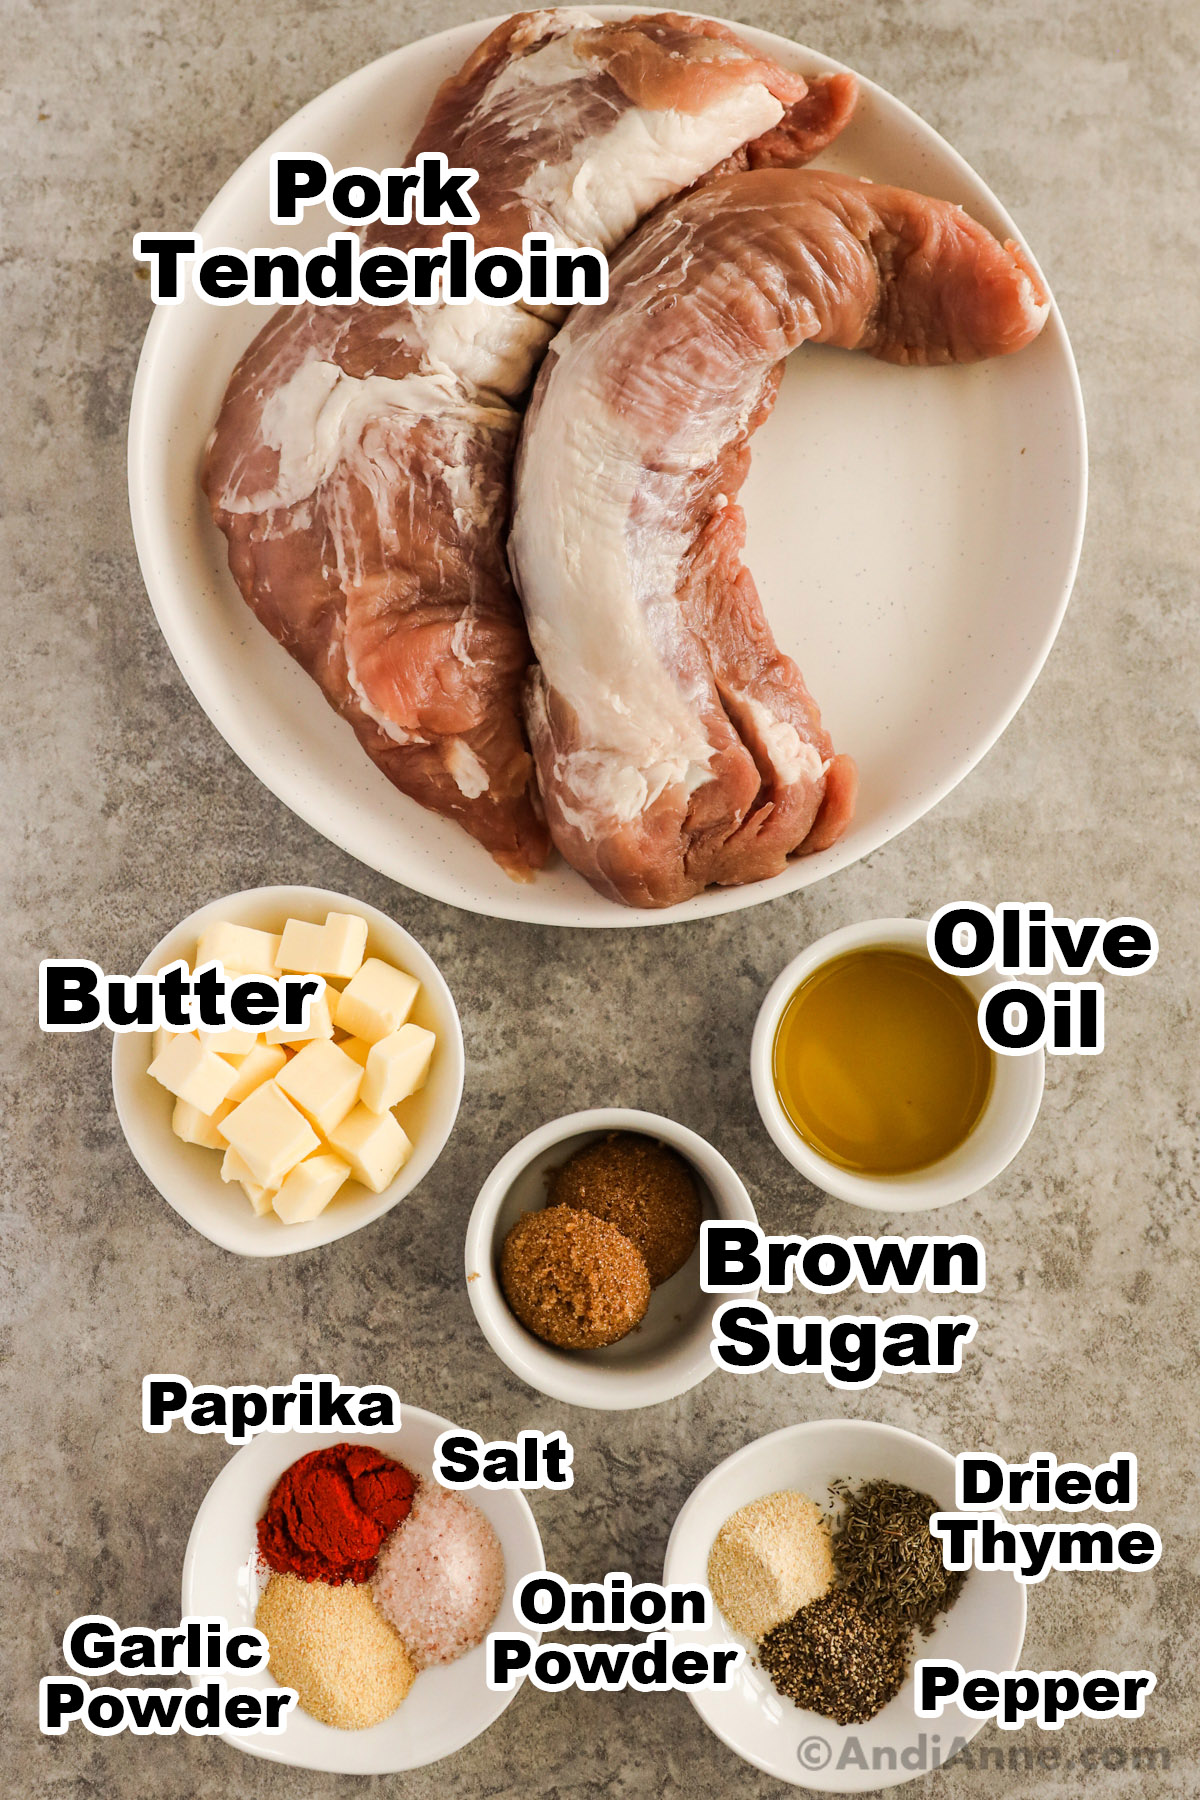 Recipe ingredinets including two raw pork tenderloins, bowls of olive oil, brown sugar, butter, and spices.